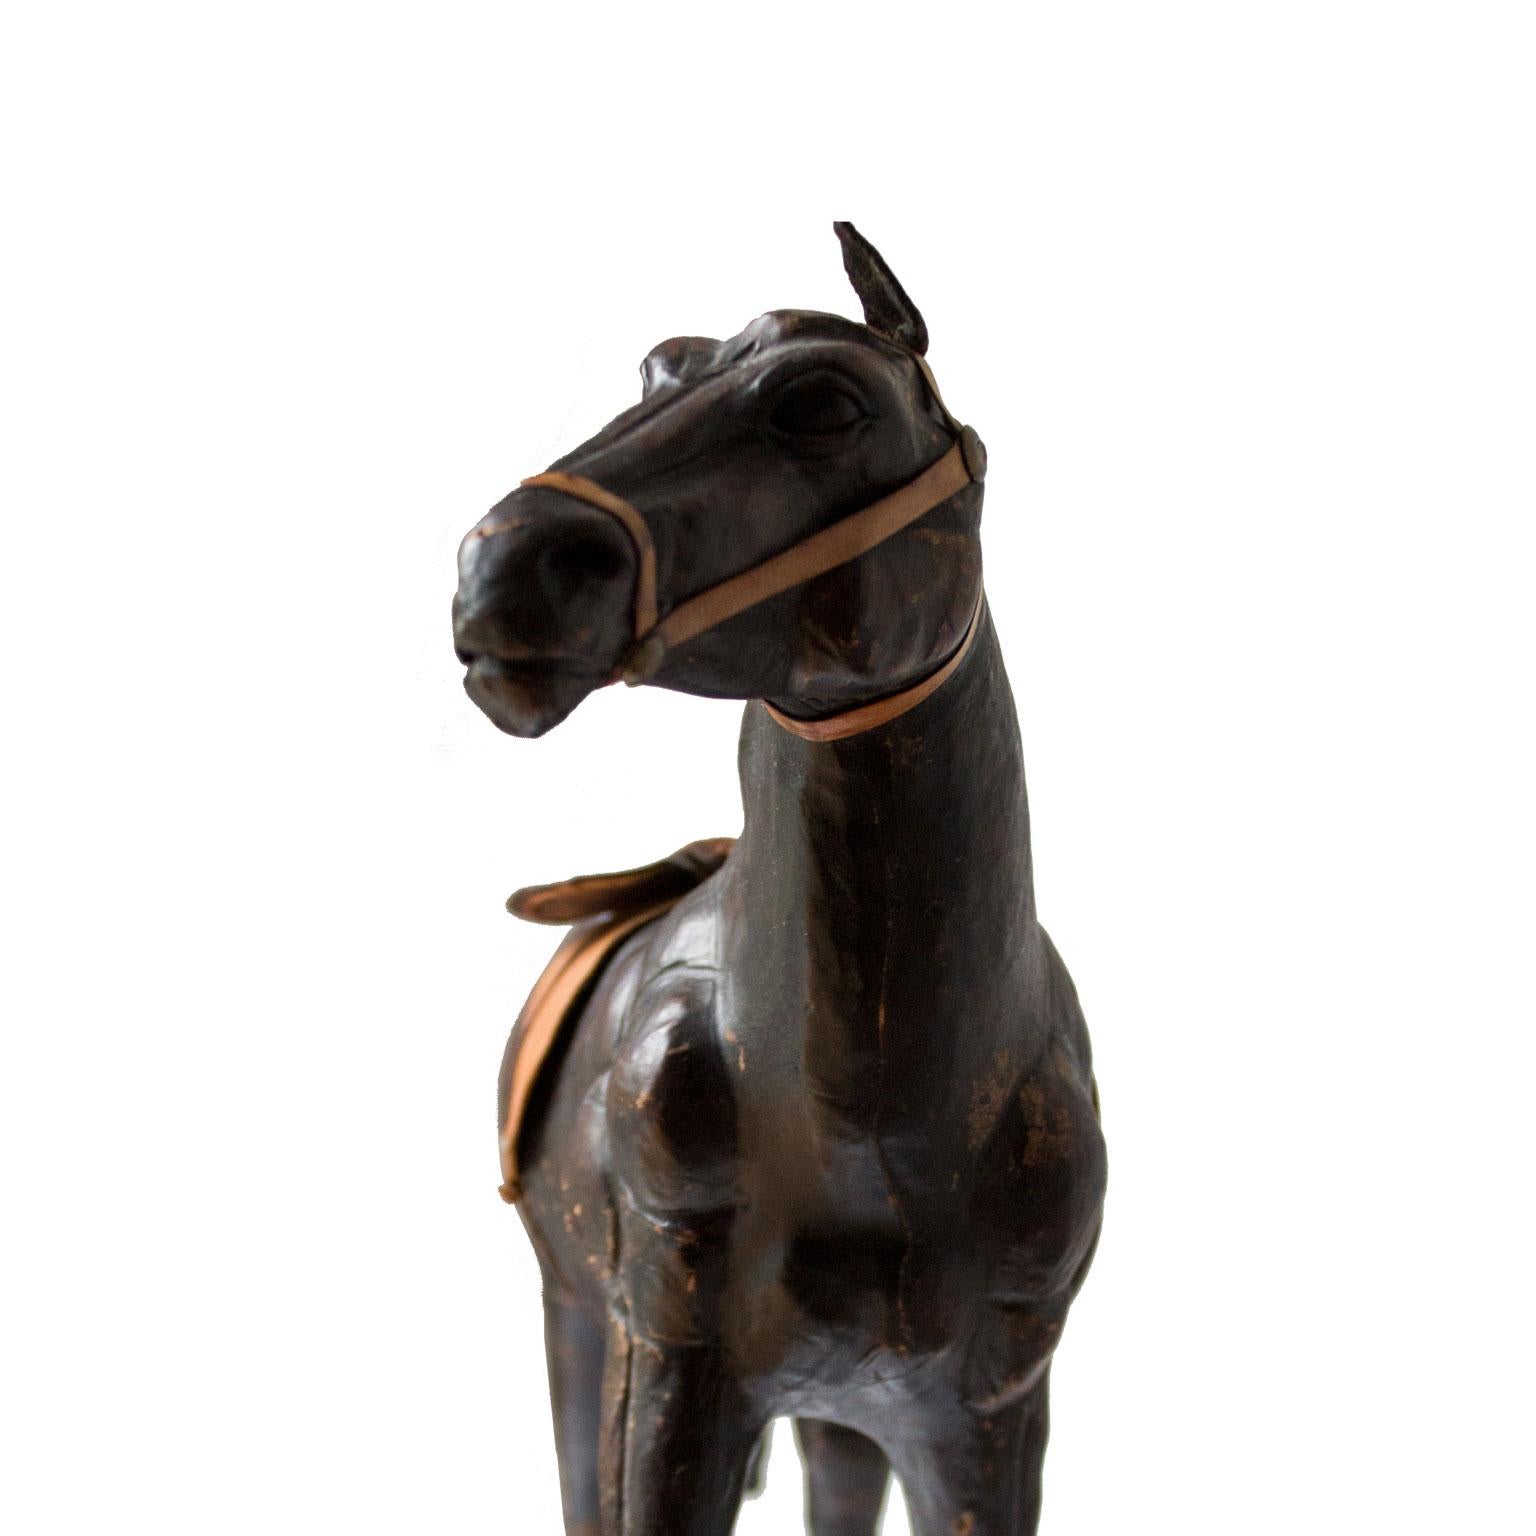 A decorative piece of a leather horse model with saddle from the 1900th century.